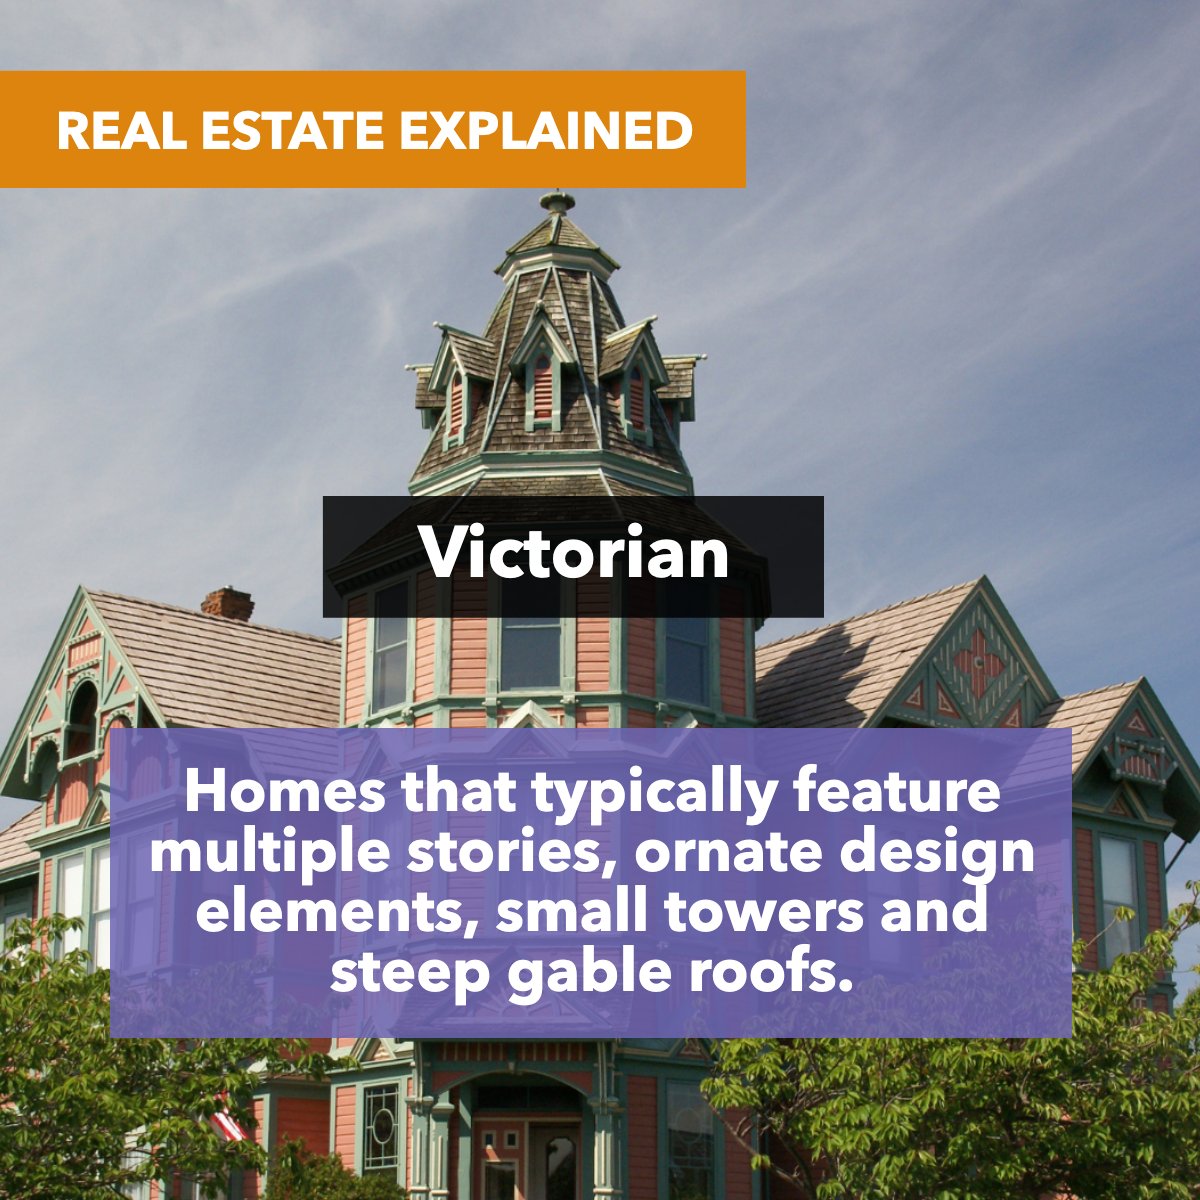 Did you know what a Victorian House is? 🤔

Is this the type of house that you like?

#victorianhouse #realestate #facts #realfacts